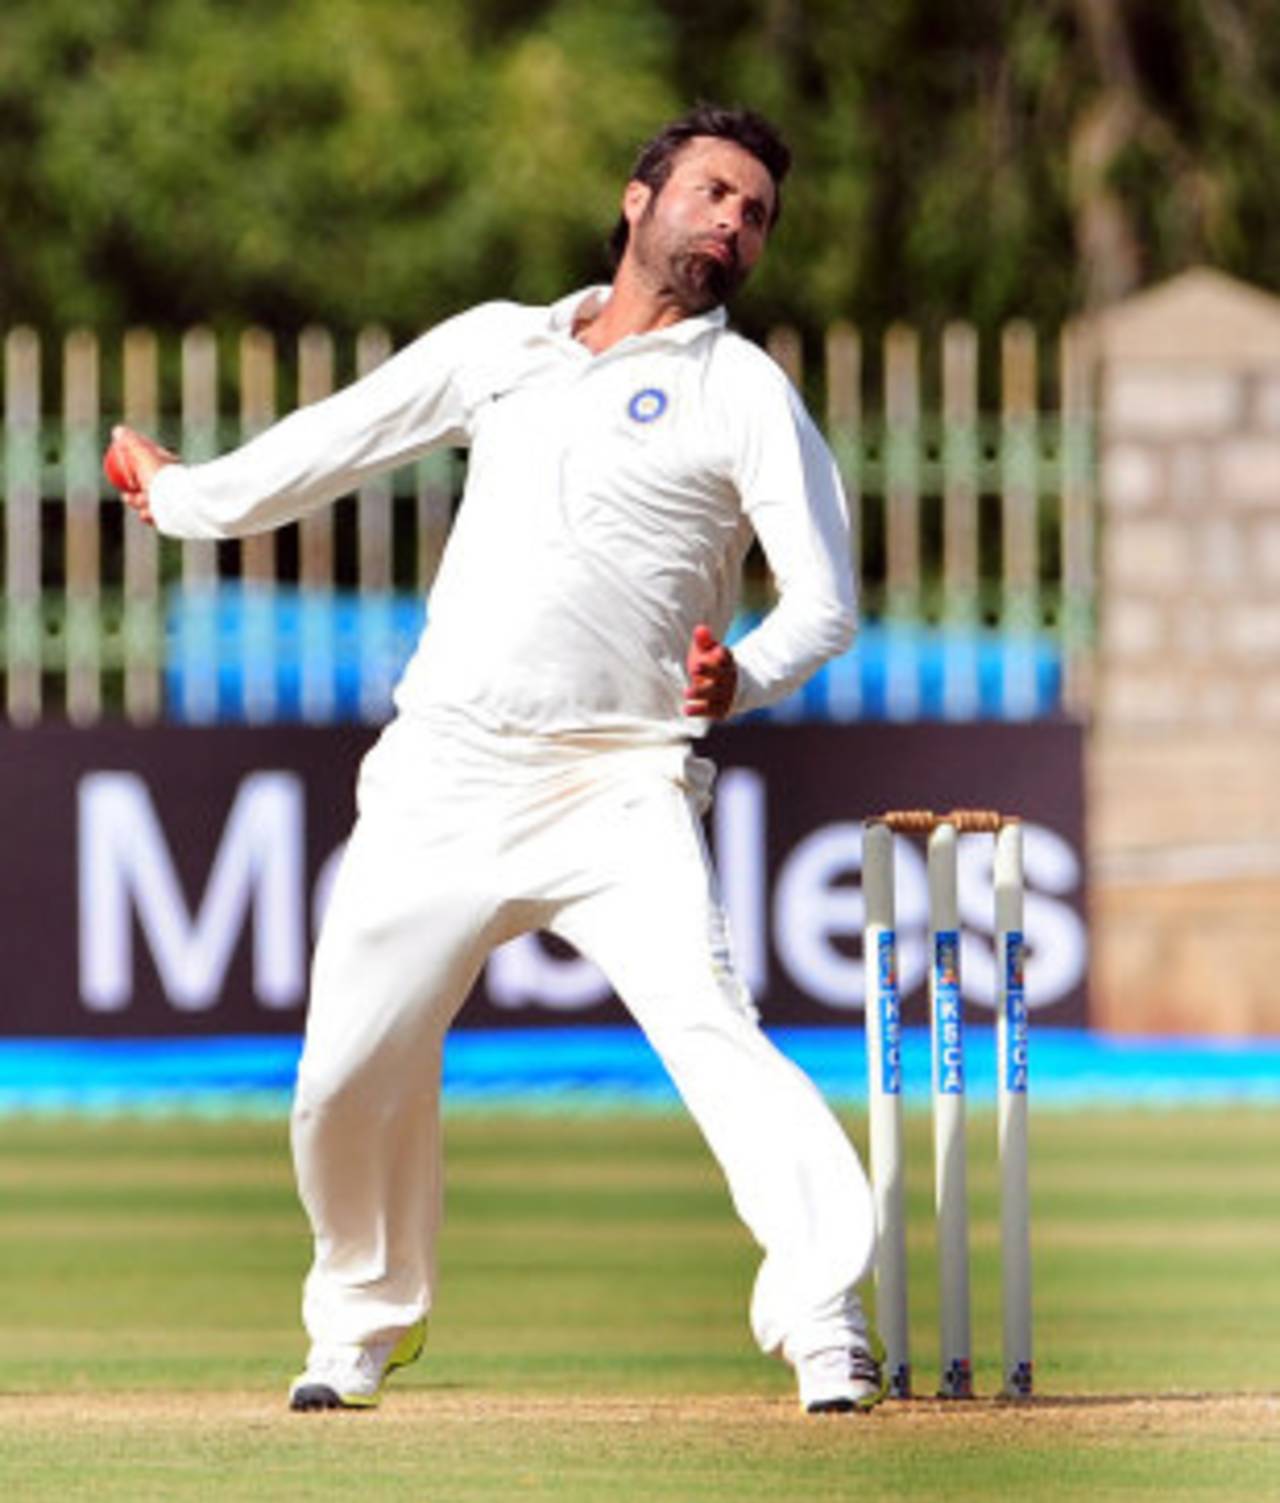 Parvez Rasool: "The whole region, I think, must be very happy that the team has qualified for the knockouts"&nbsp;&nbsp;&bull;&nbsp;&nbsp;BCCI